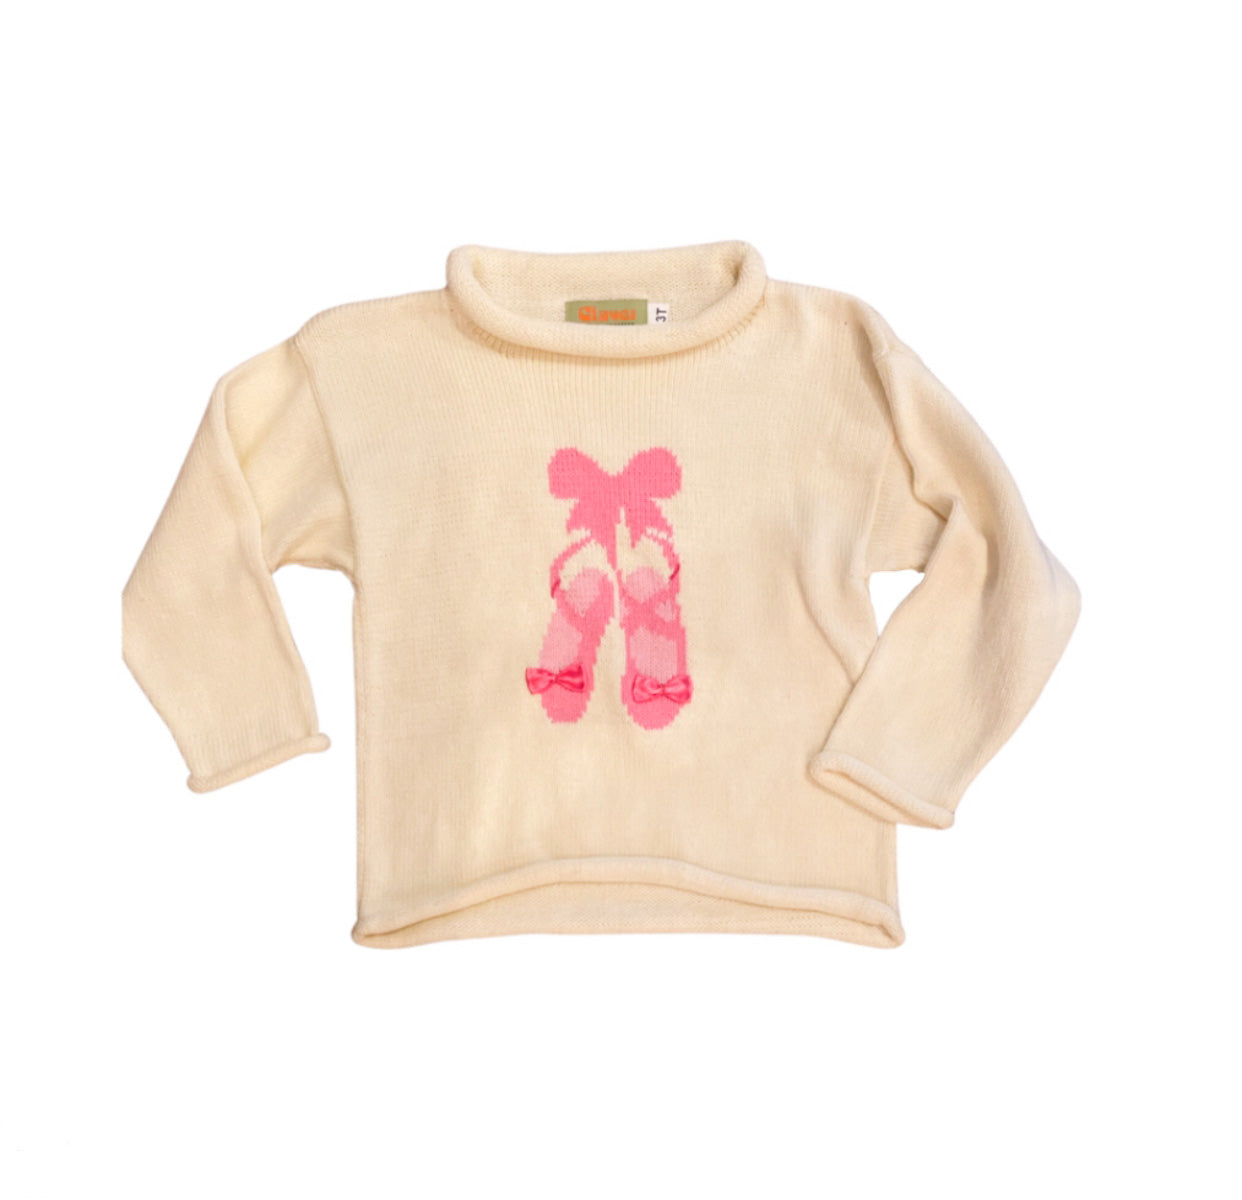 Ivory Ballet Slippers Roll Sweater